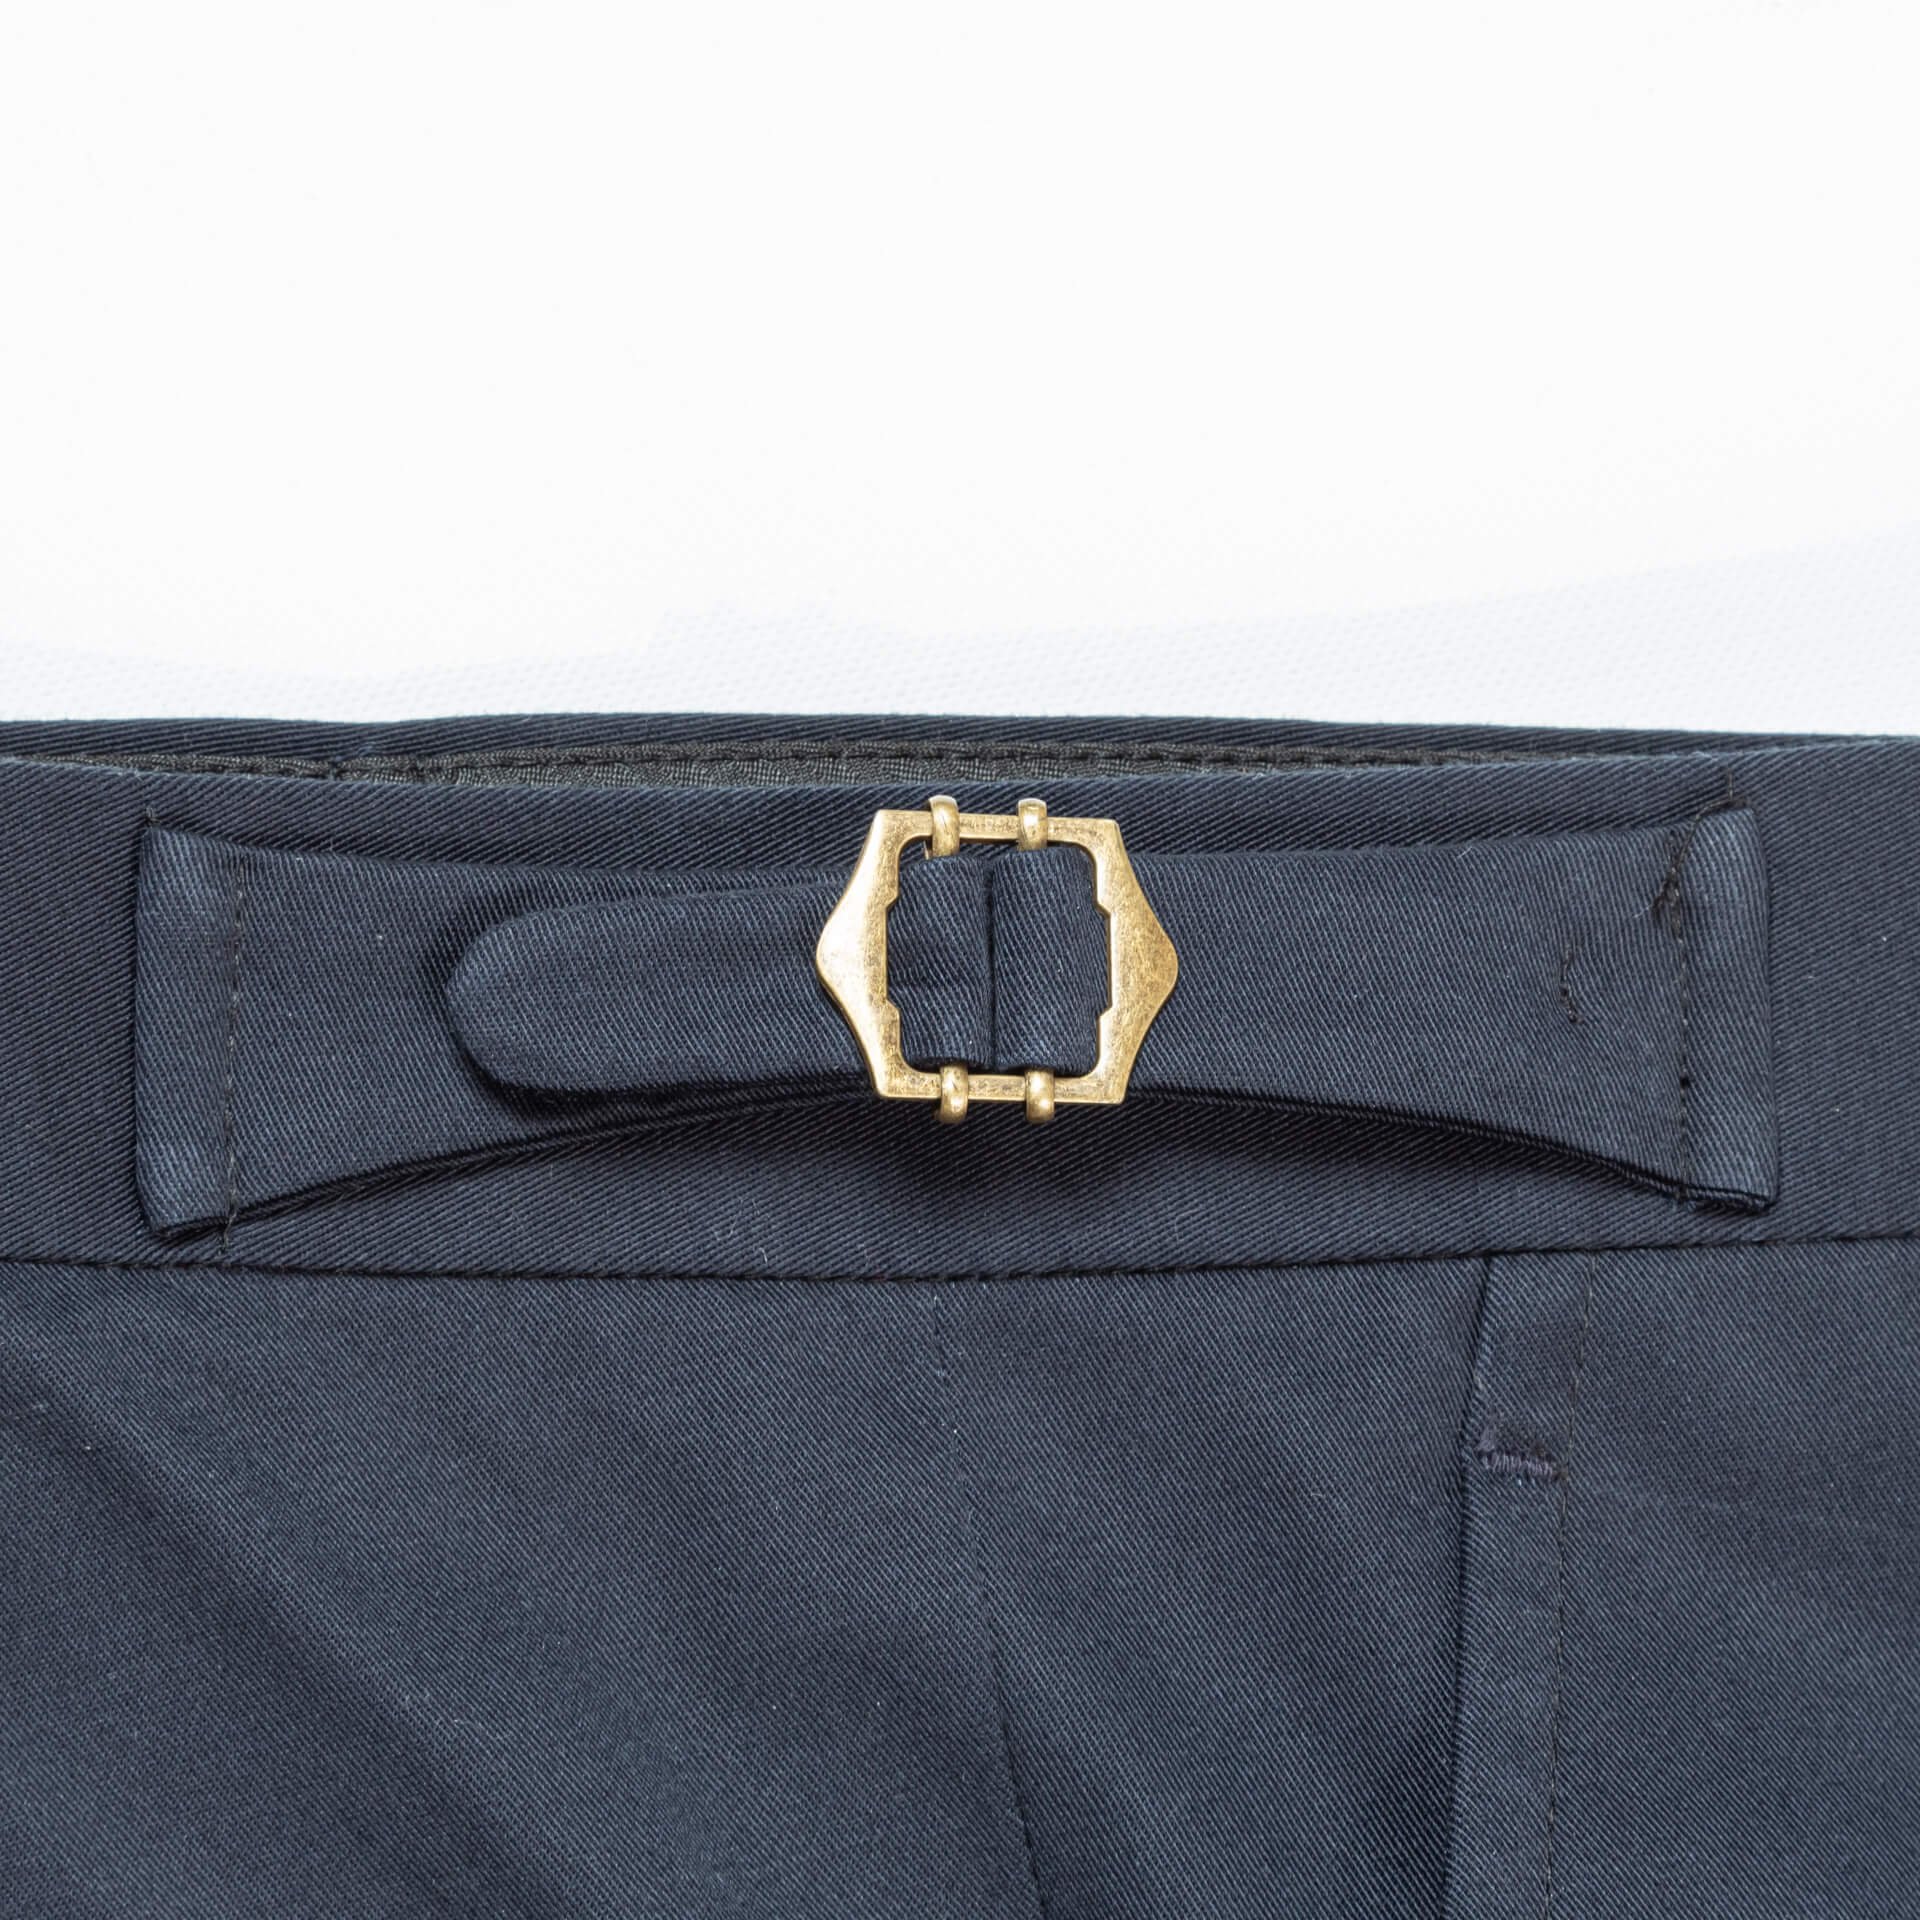   Trousers Without Fold Navy Blue Tailored